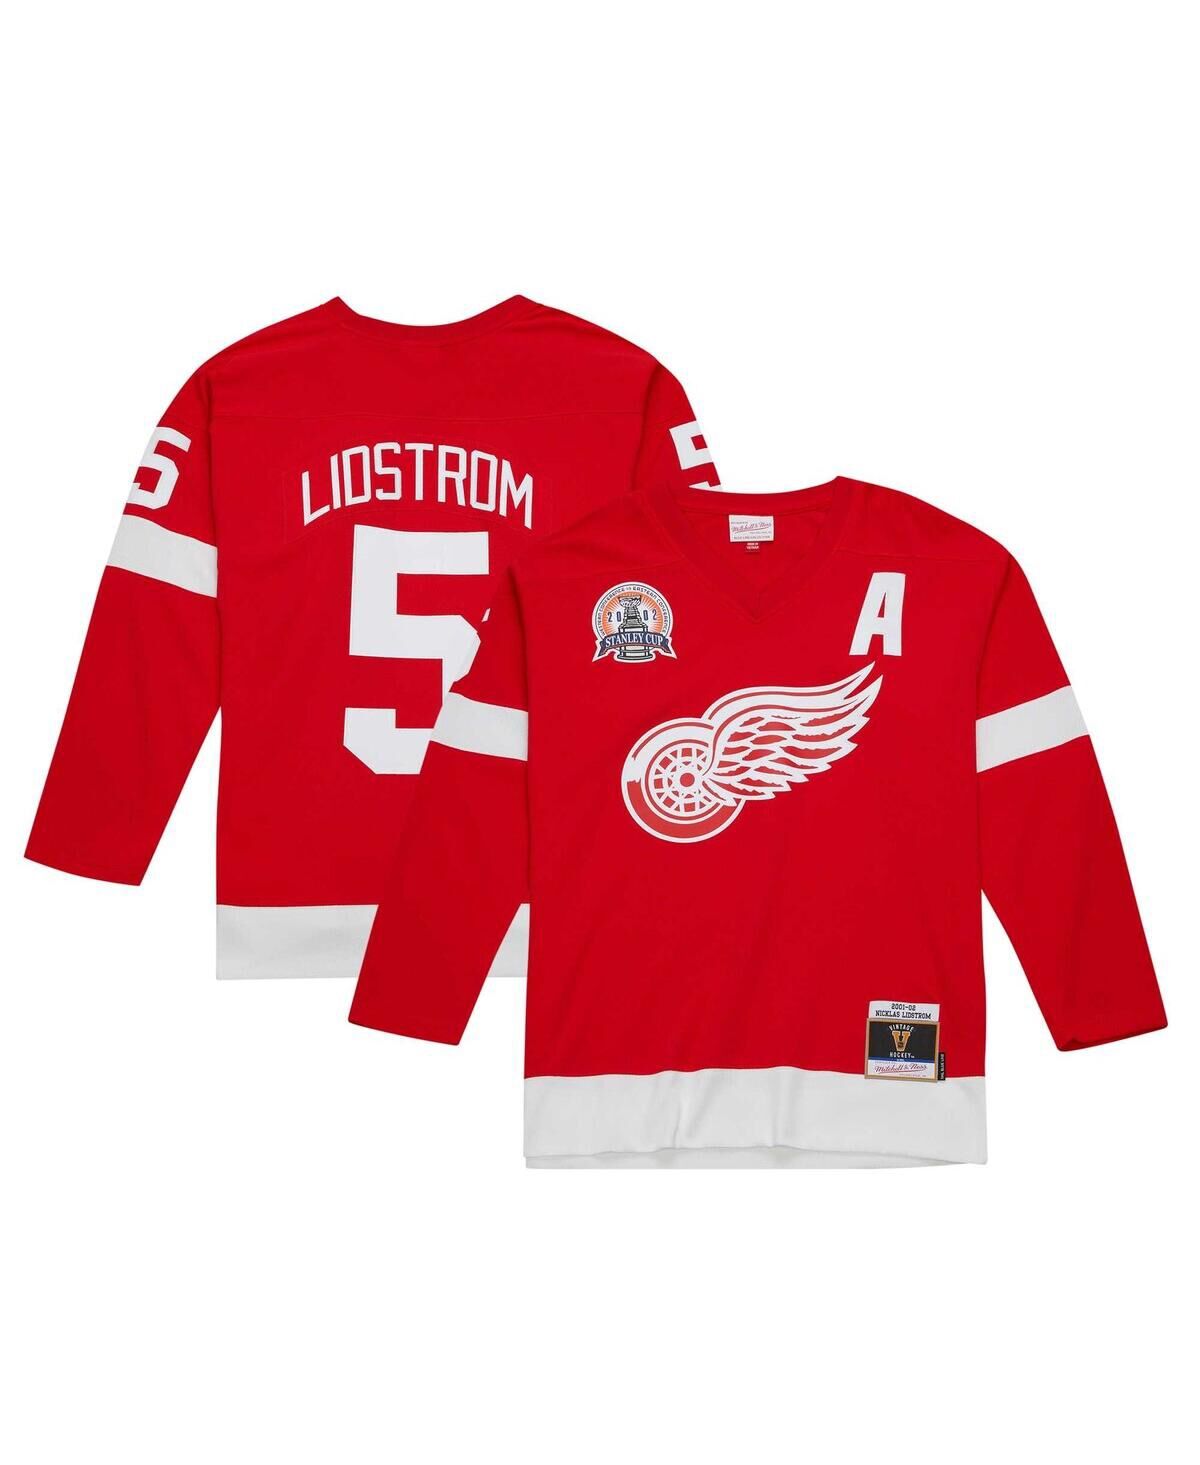 Mitchell & Ness Men's Mitchell & Ness Nicklas Lidstrom Red Detroit Red Wings Alternate Captain Patch 2001/02 Blue Line Player Jersey - Red